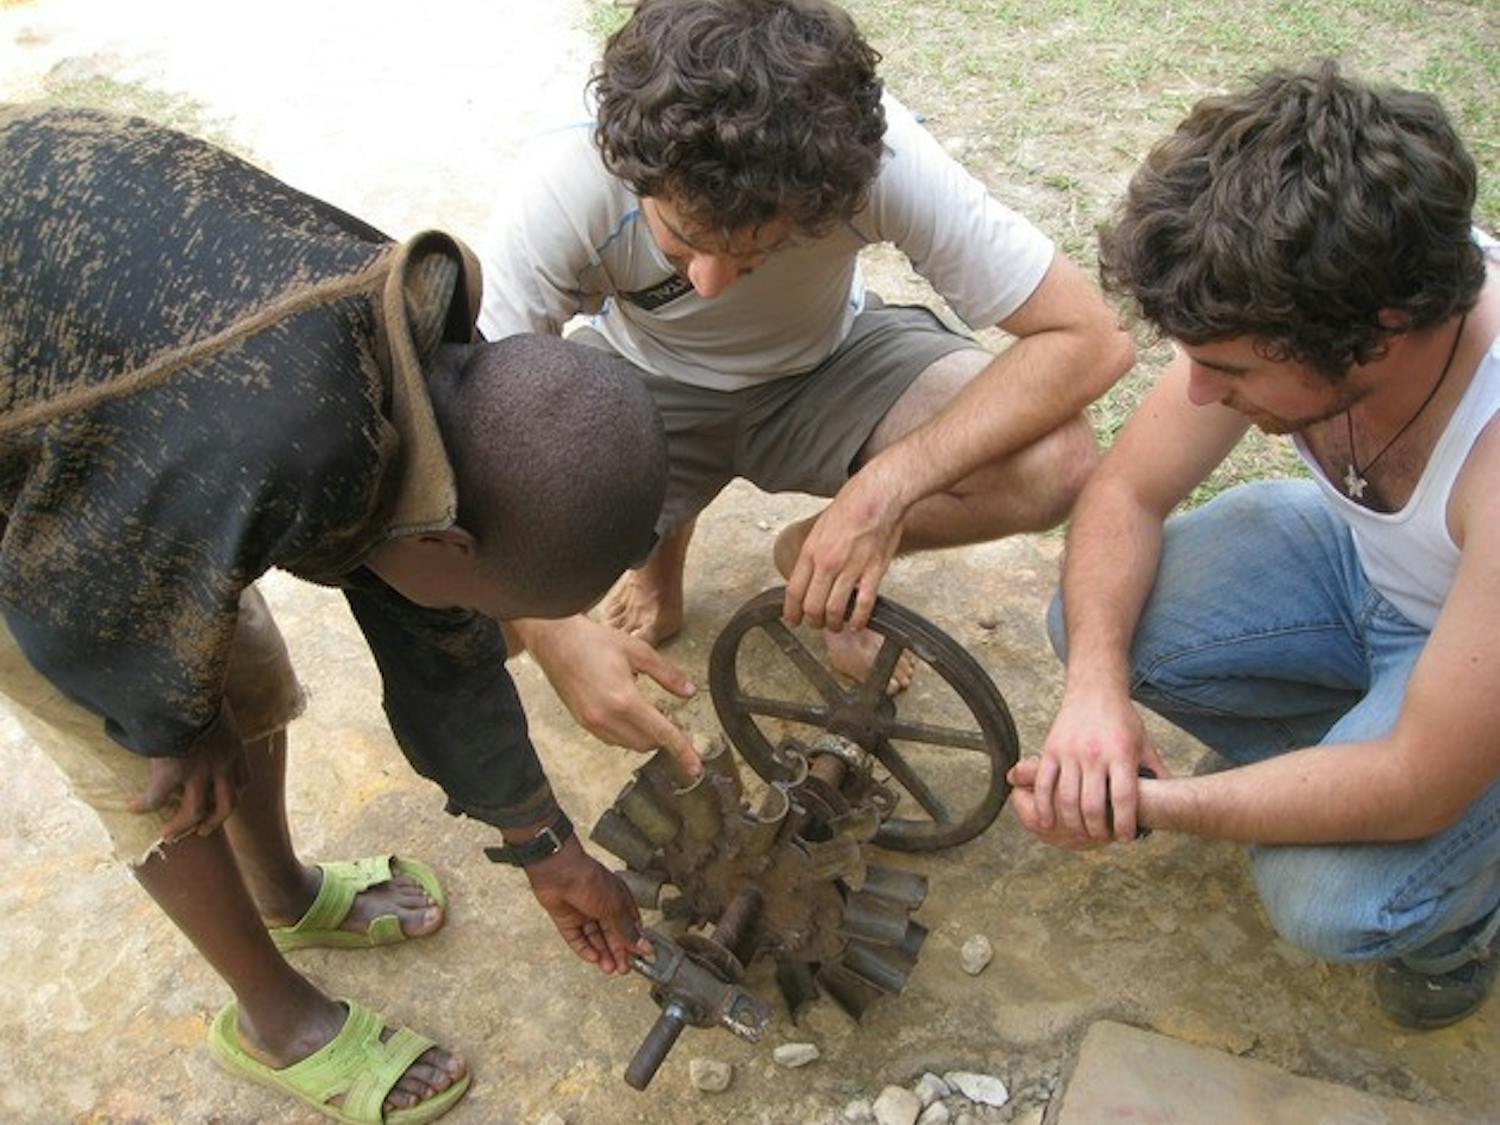 Members of Dartmouth Humanitarian Engineering work on a project to expand hydroelectric power in Rwanda.